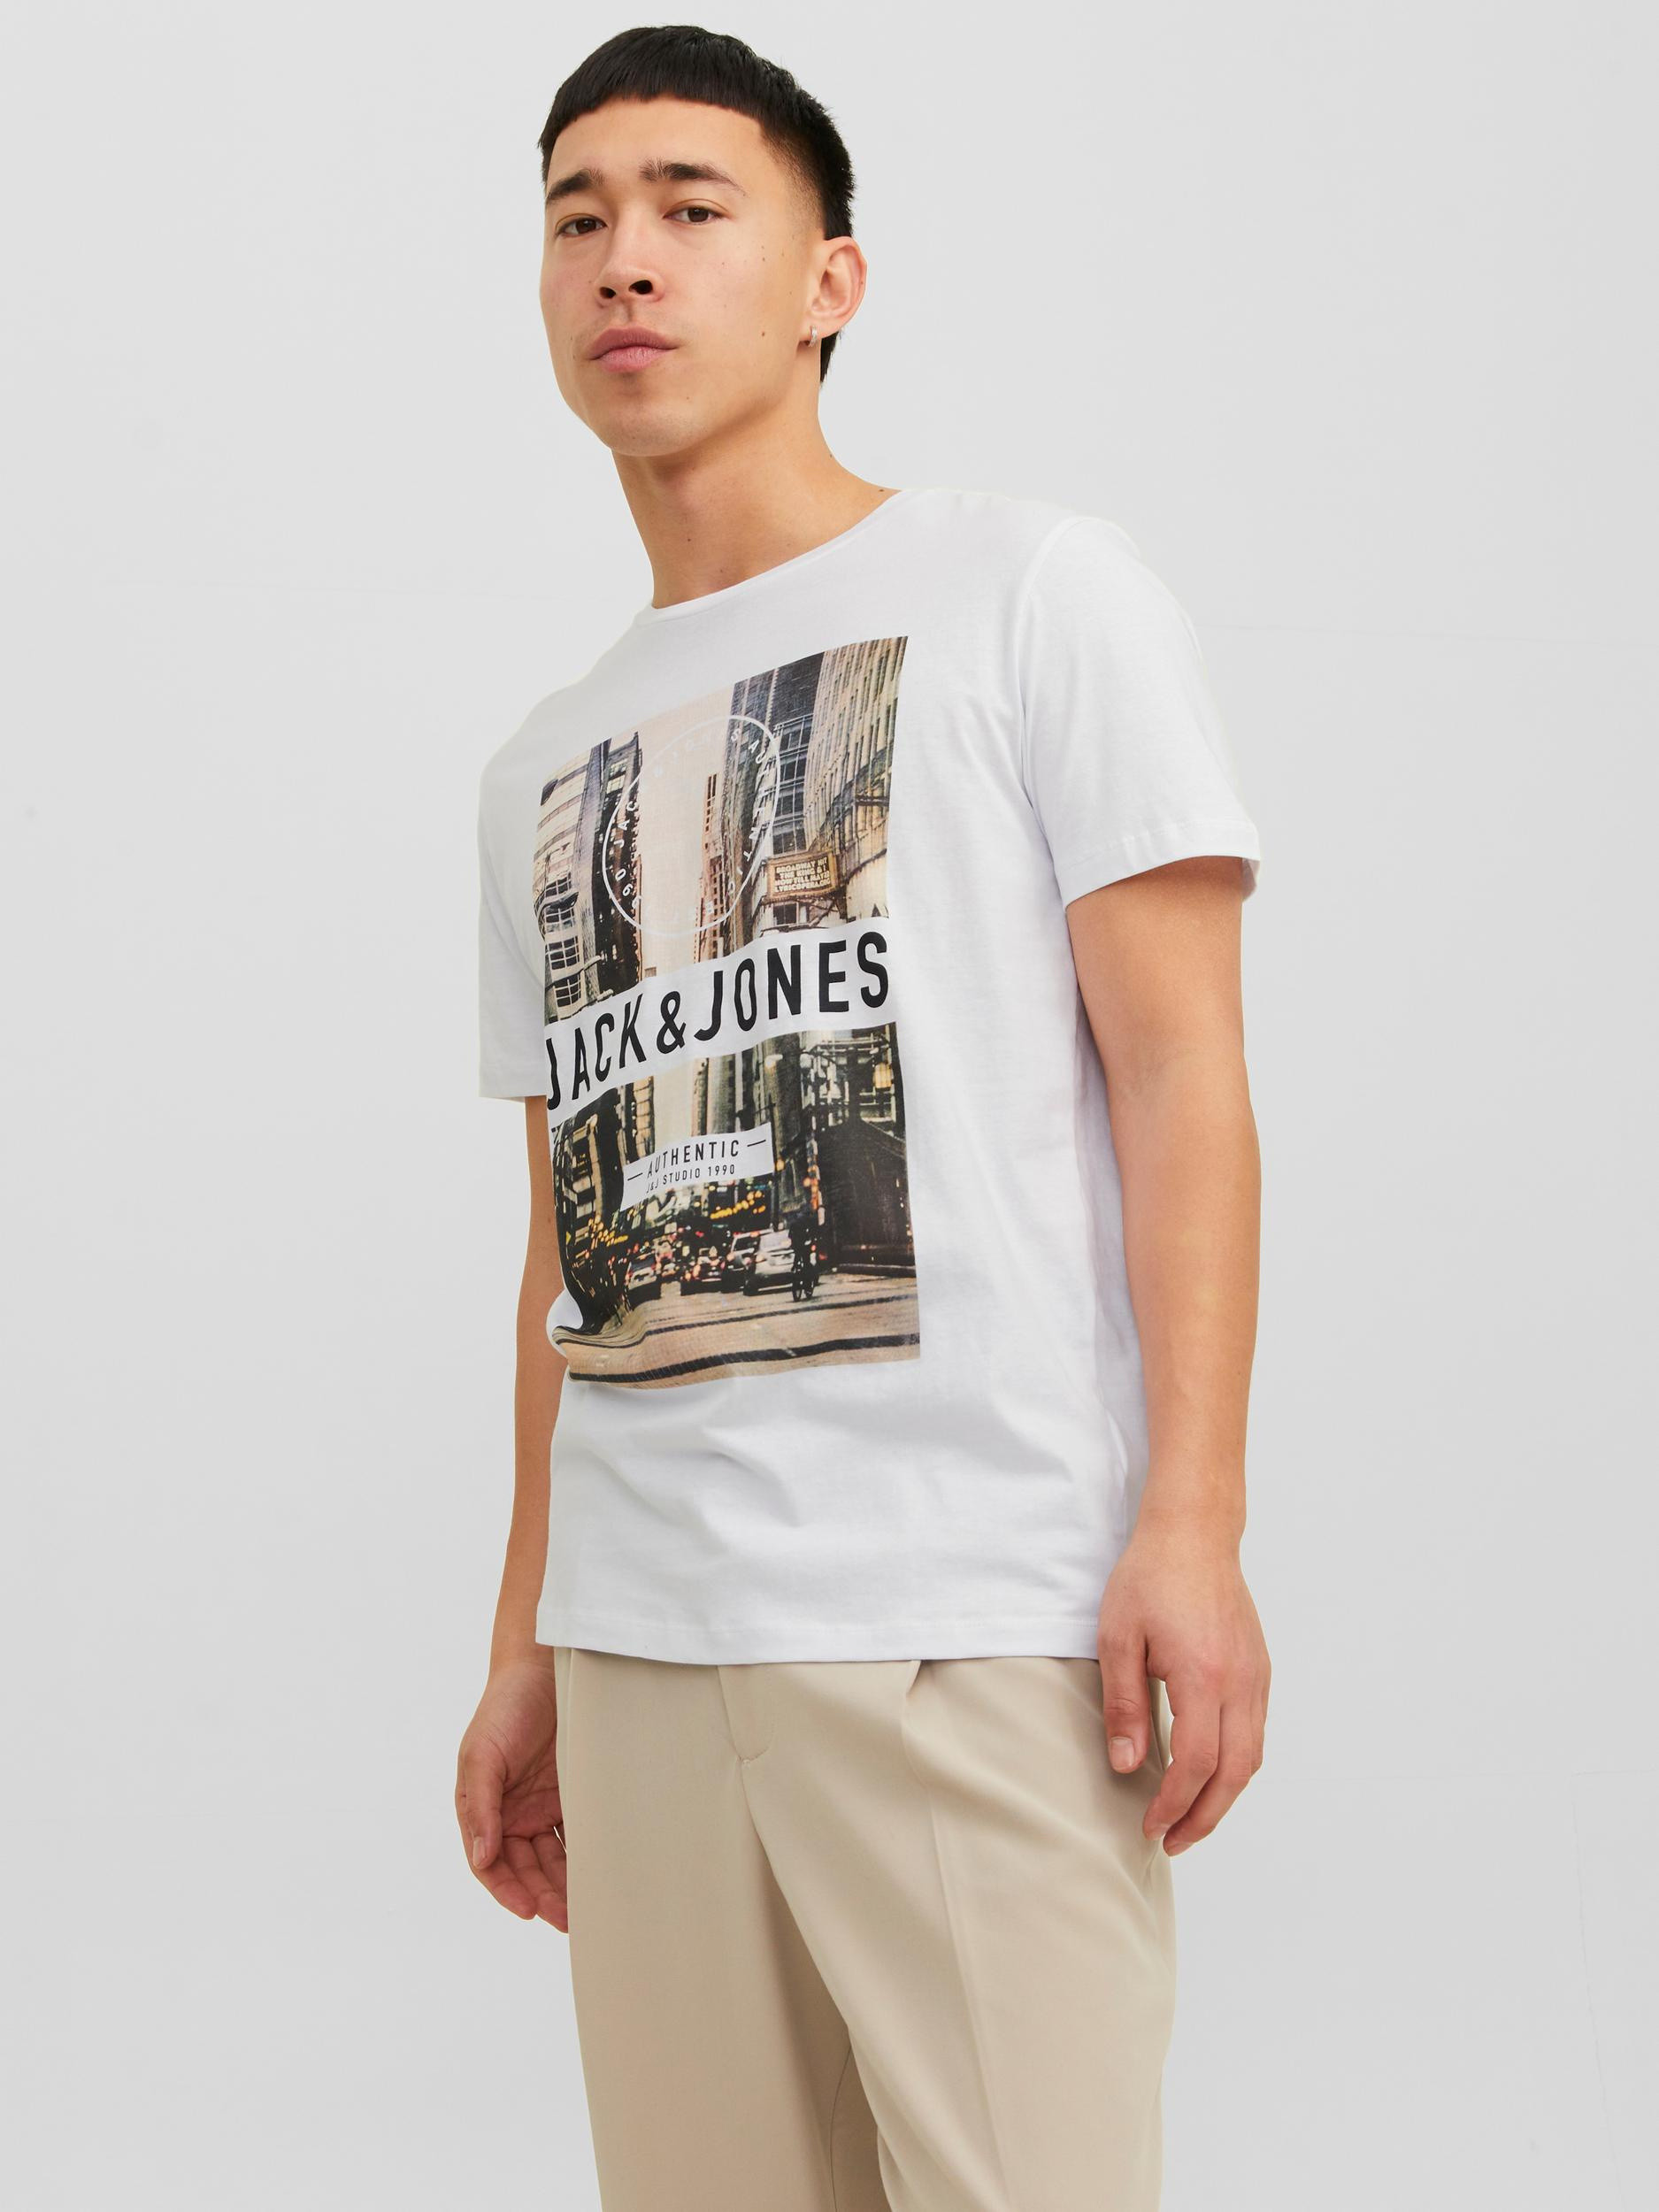 Jack & Jones -Cotton T-shirt with print, White, large image number 3